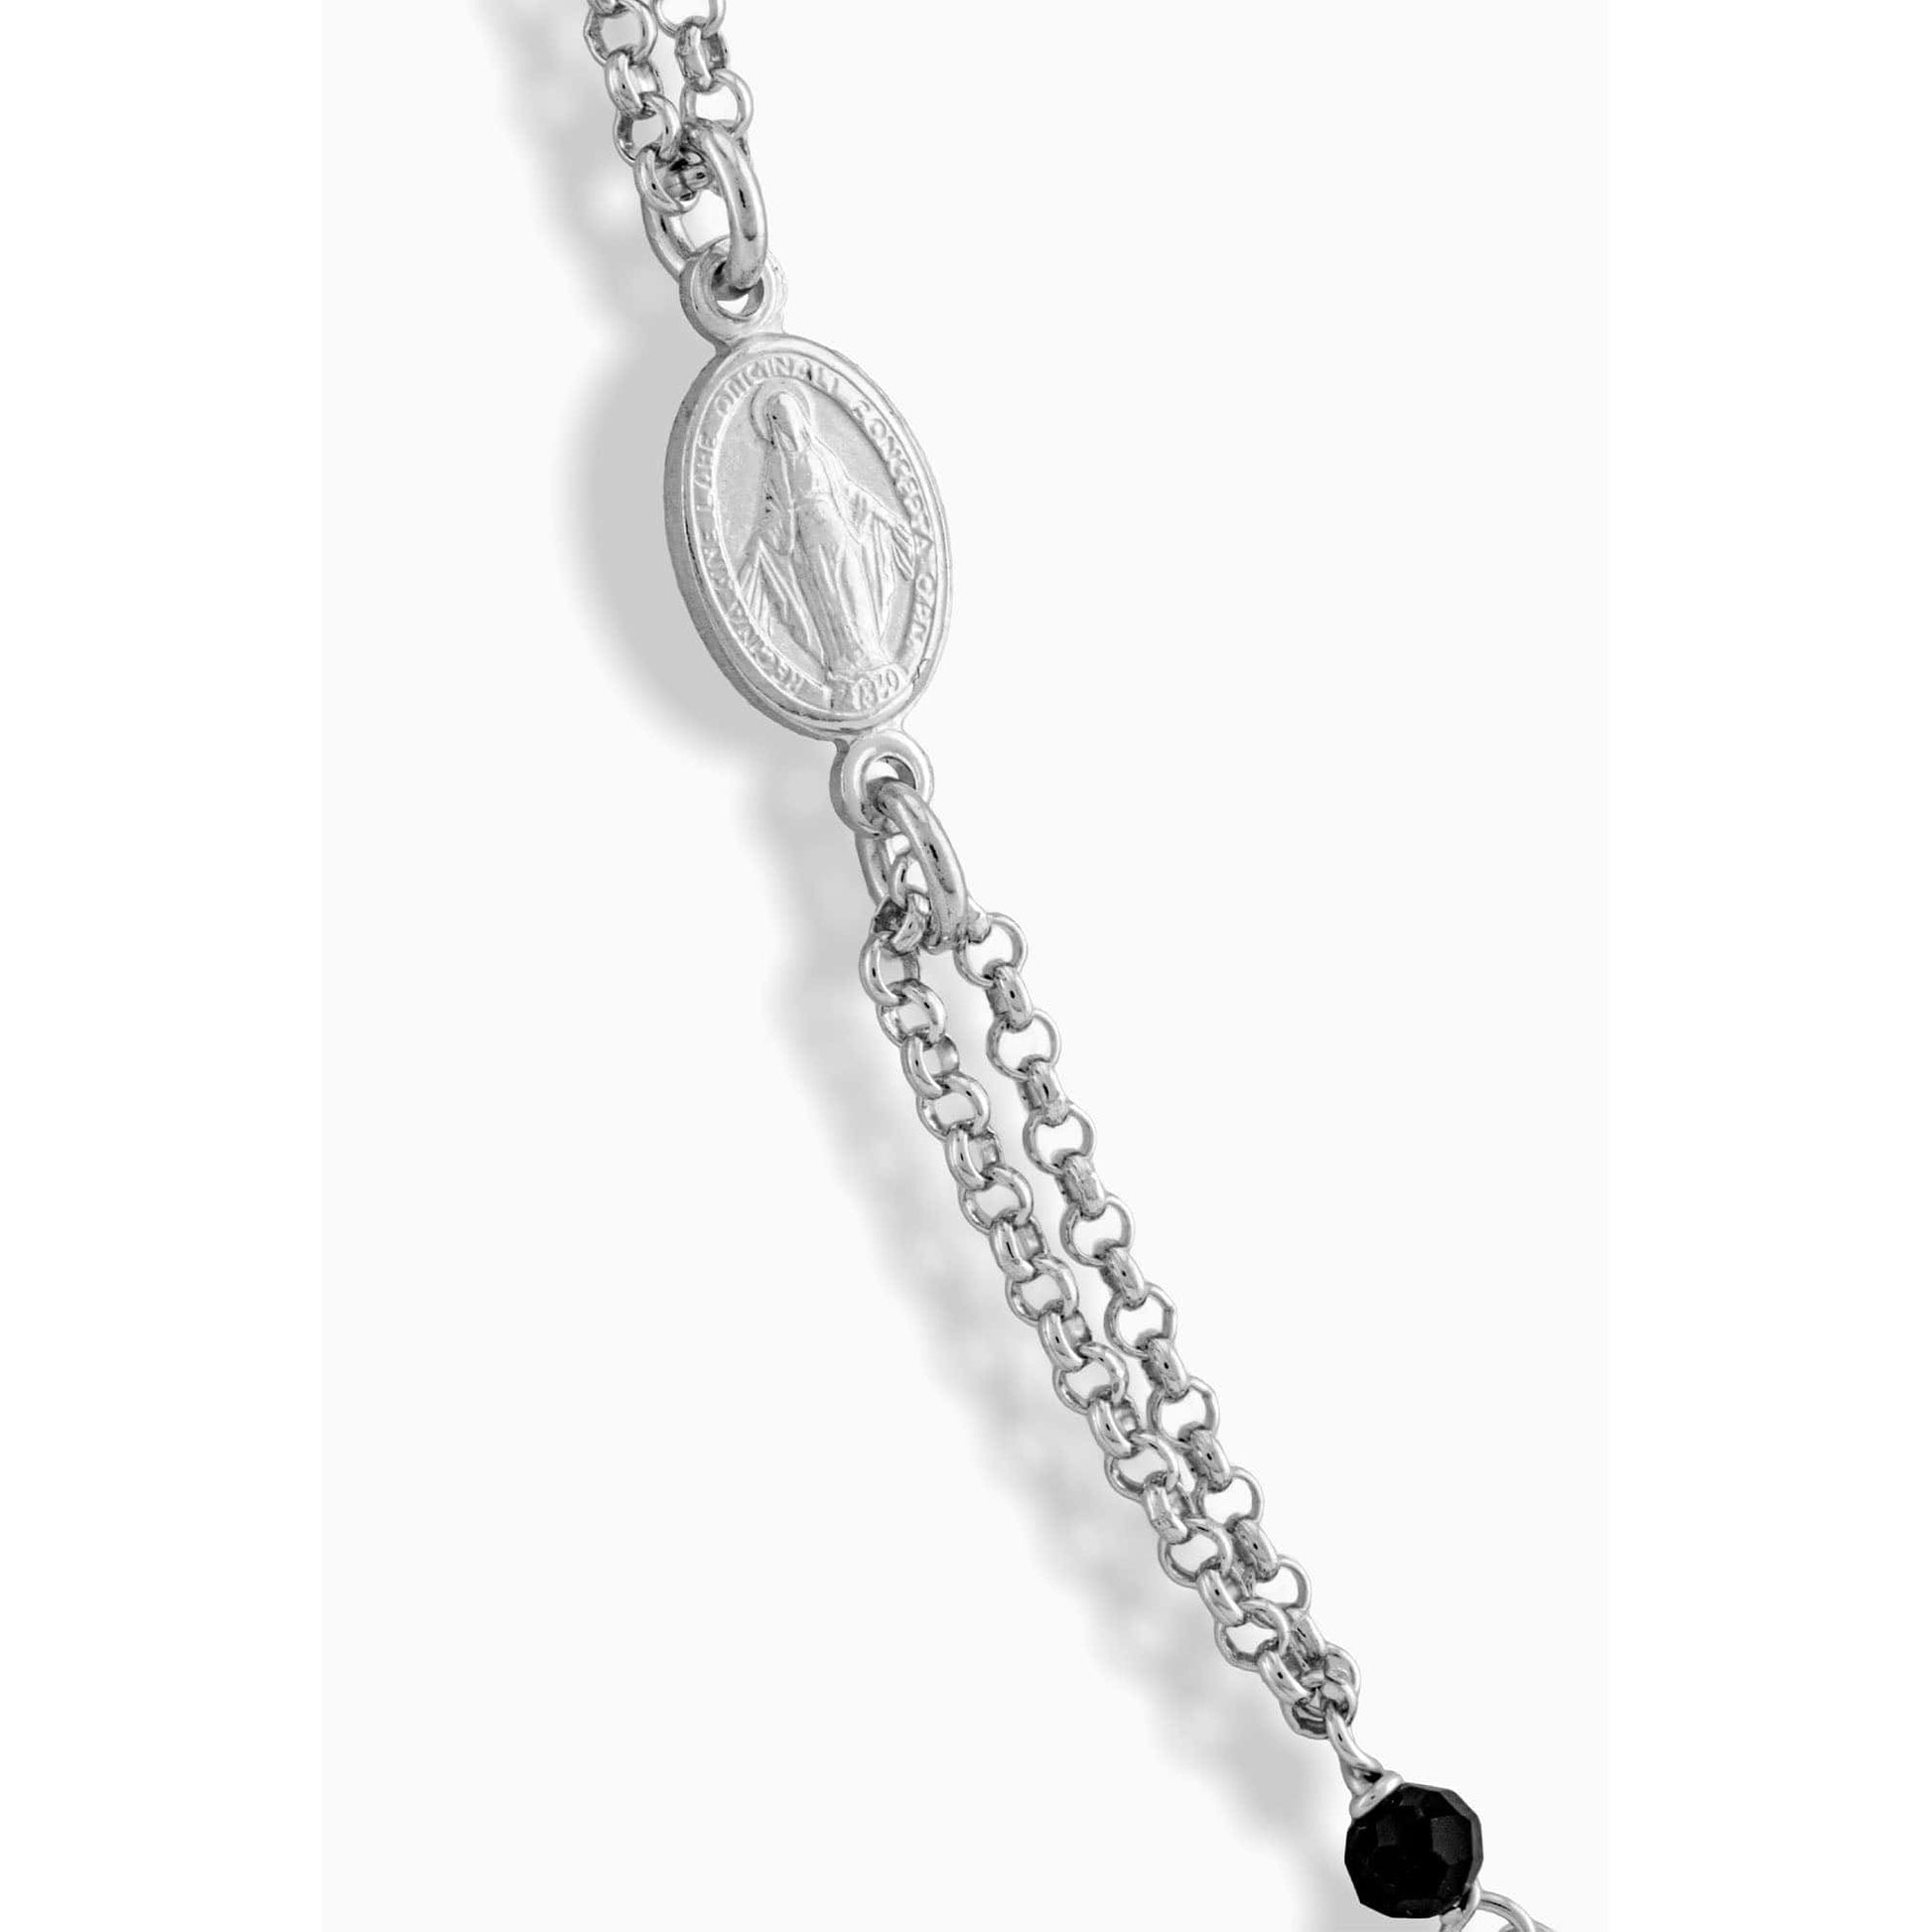 MONDO CATTOLICO Prayer Beads STERLING SILVER PLATED 3 MM BLACK BEADS NECKLACE